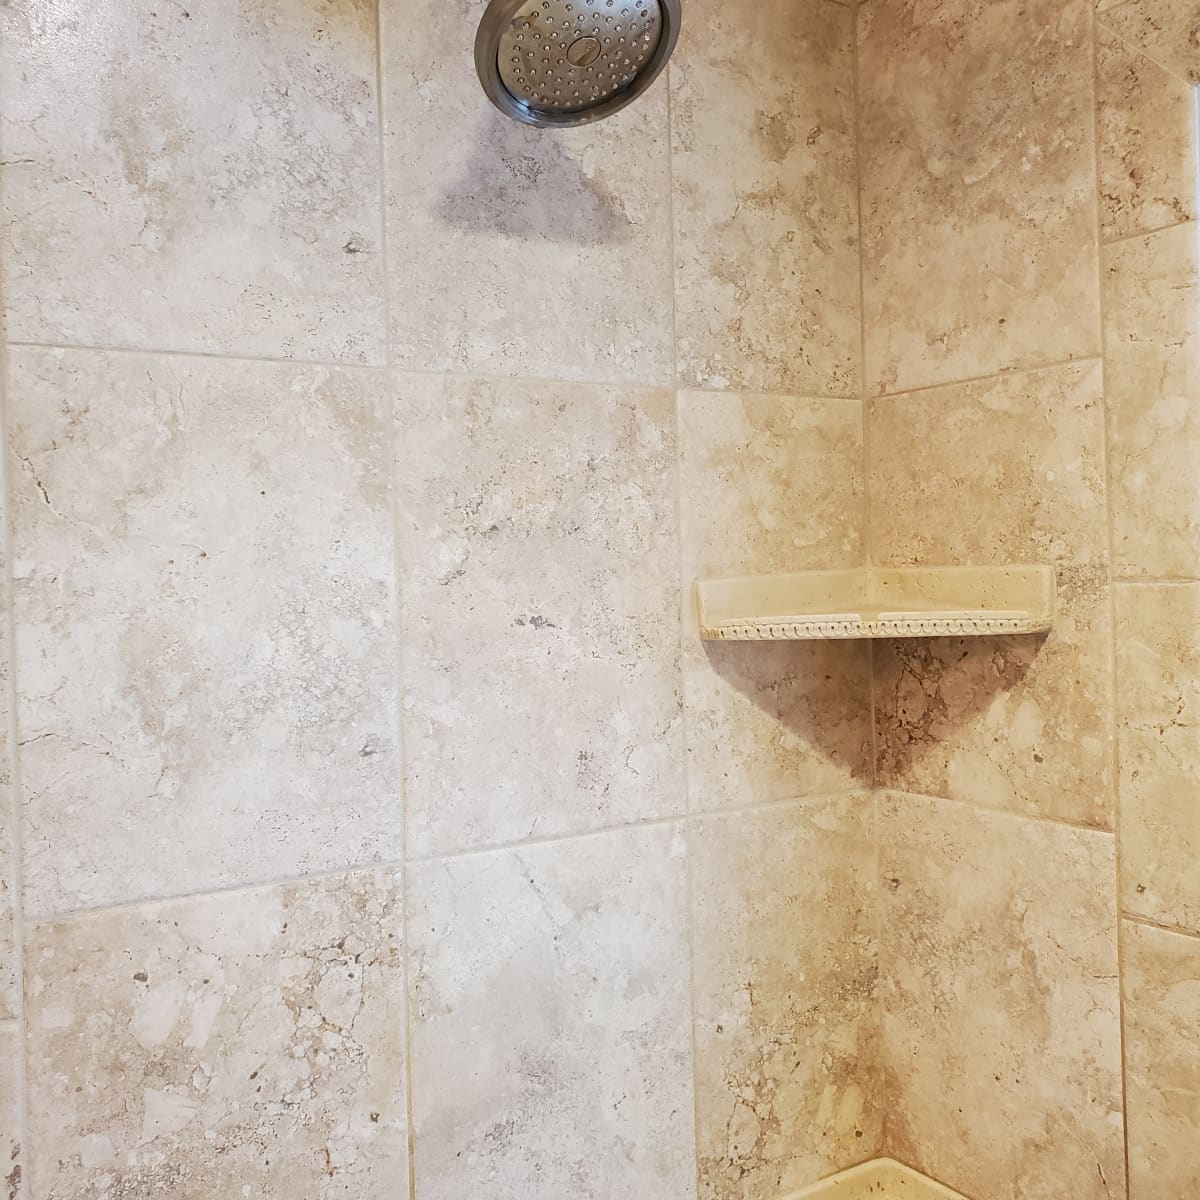 How To Remove Hard Water Stains From, How To Remove Tough Stains From Bathroom Tiles